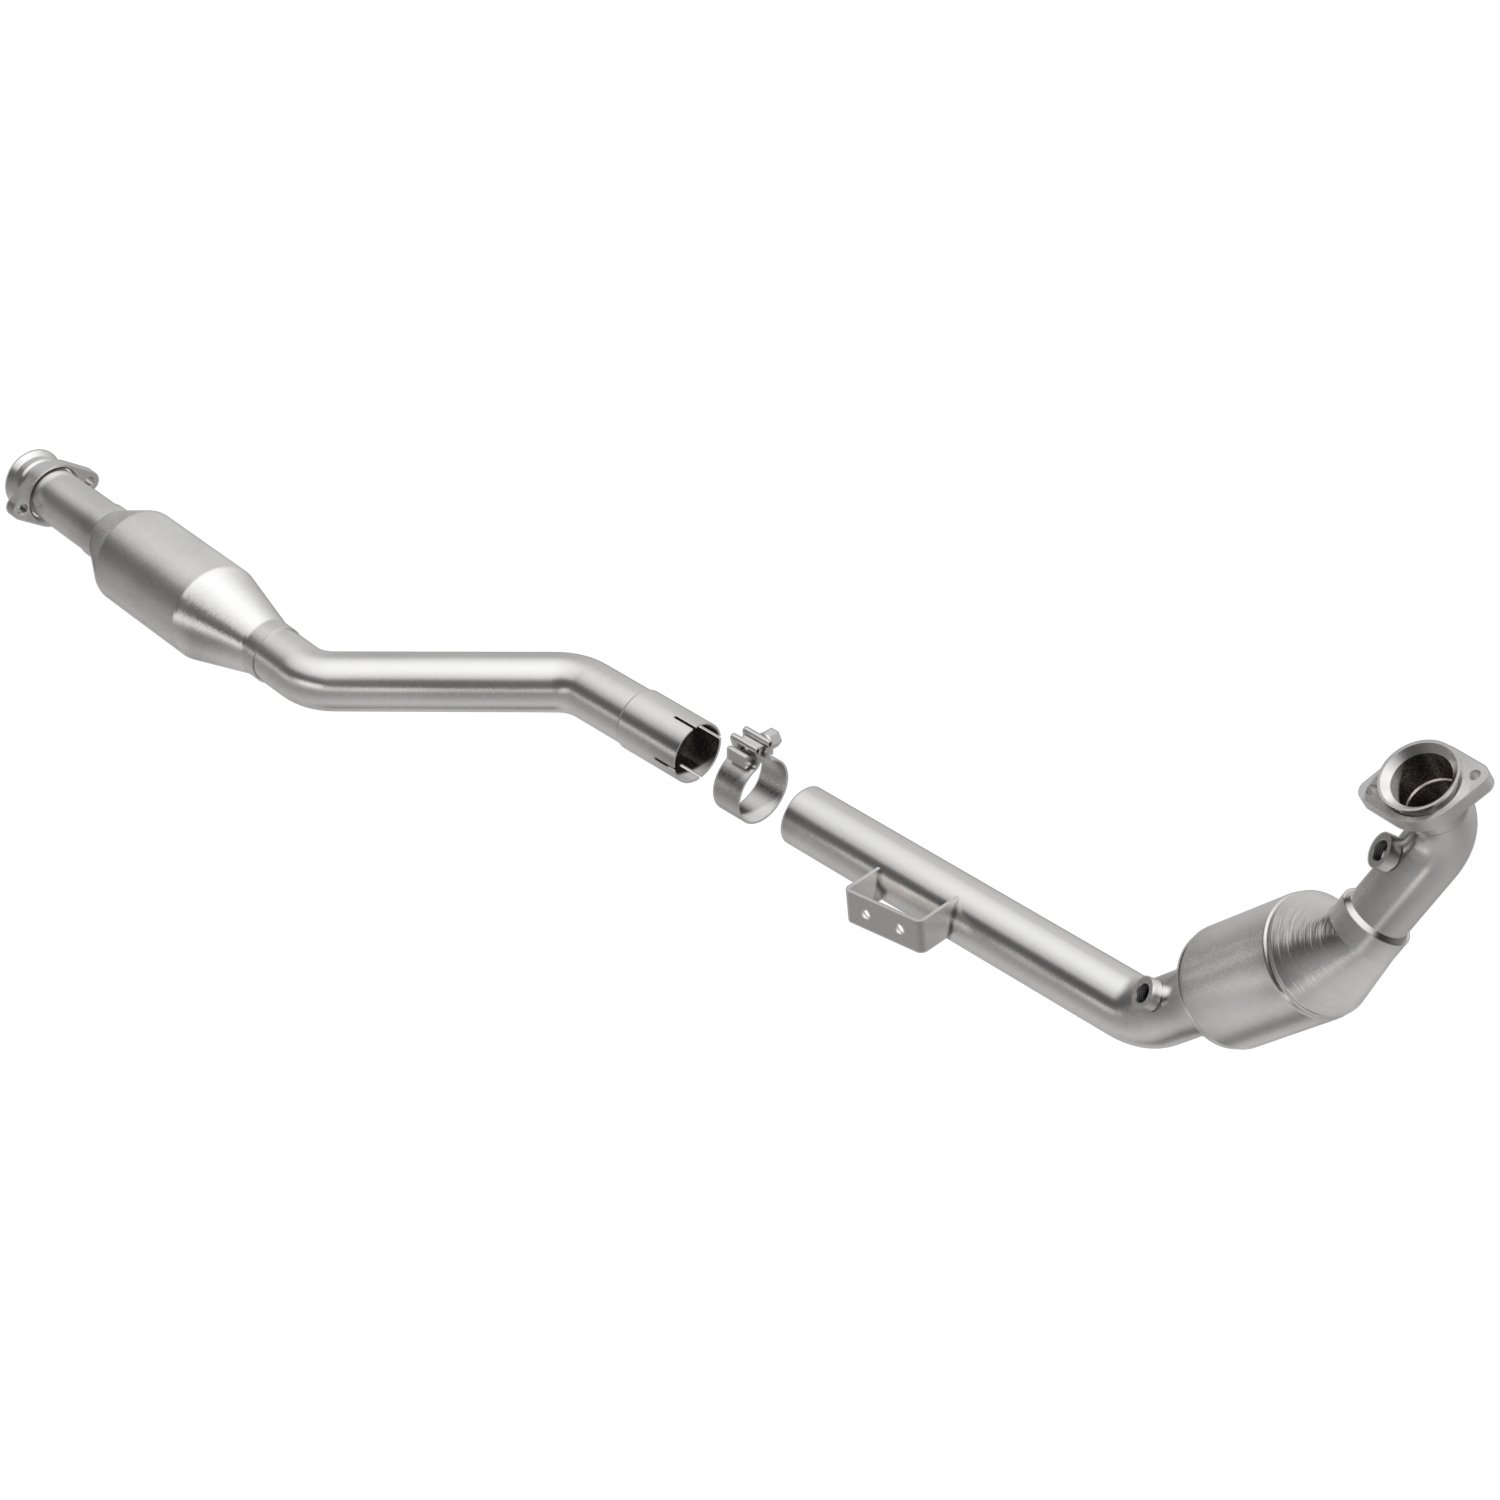 HM Grade Federal / EPA Compliant Direct-Fit Catalytic Converter 24113